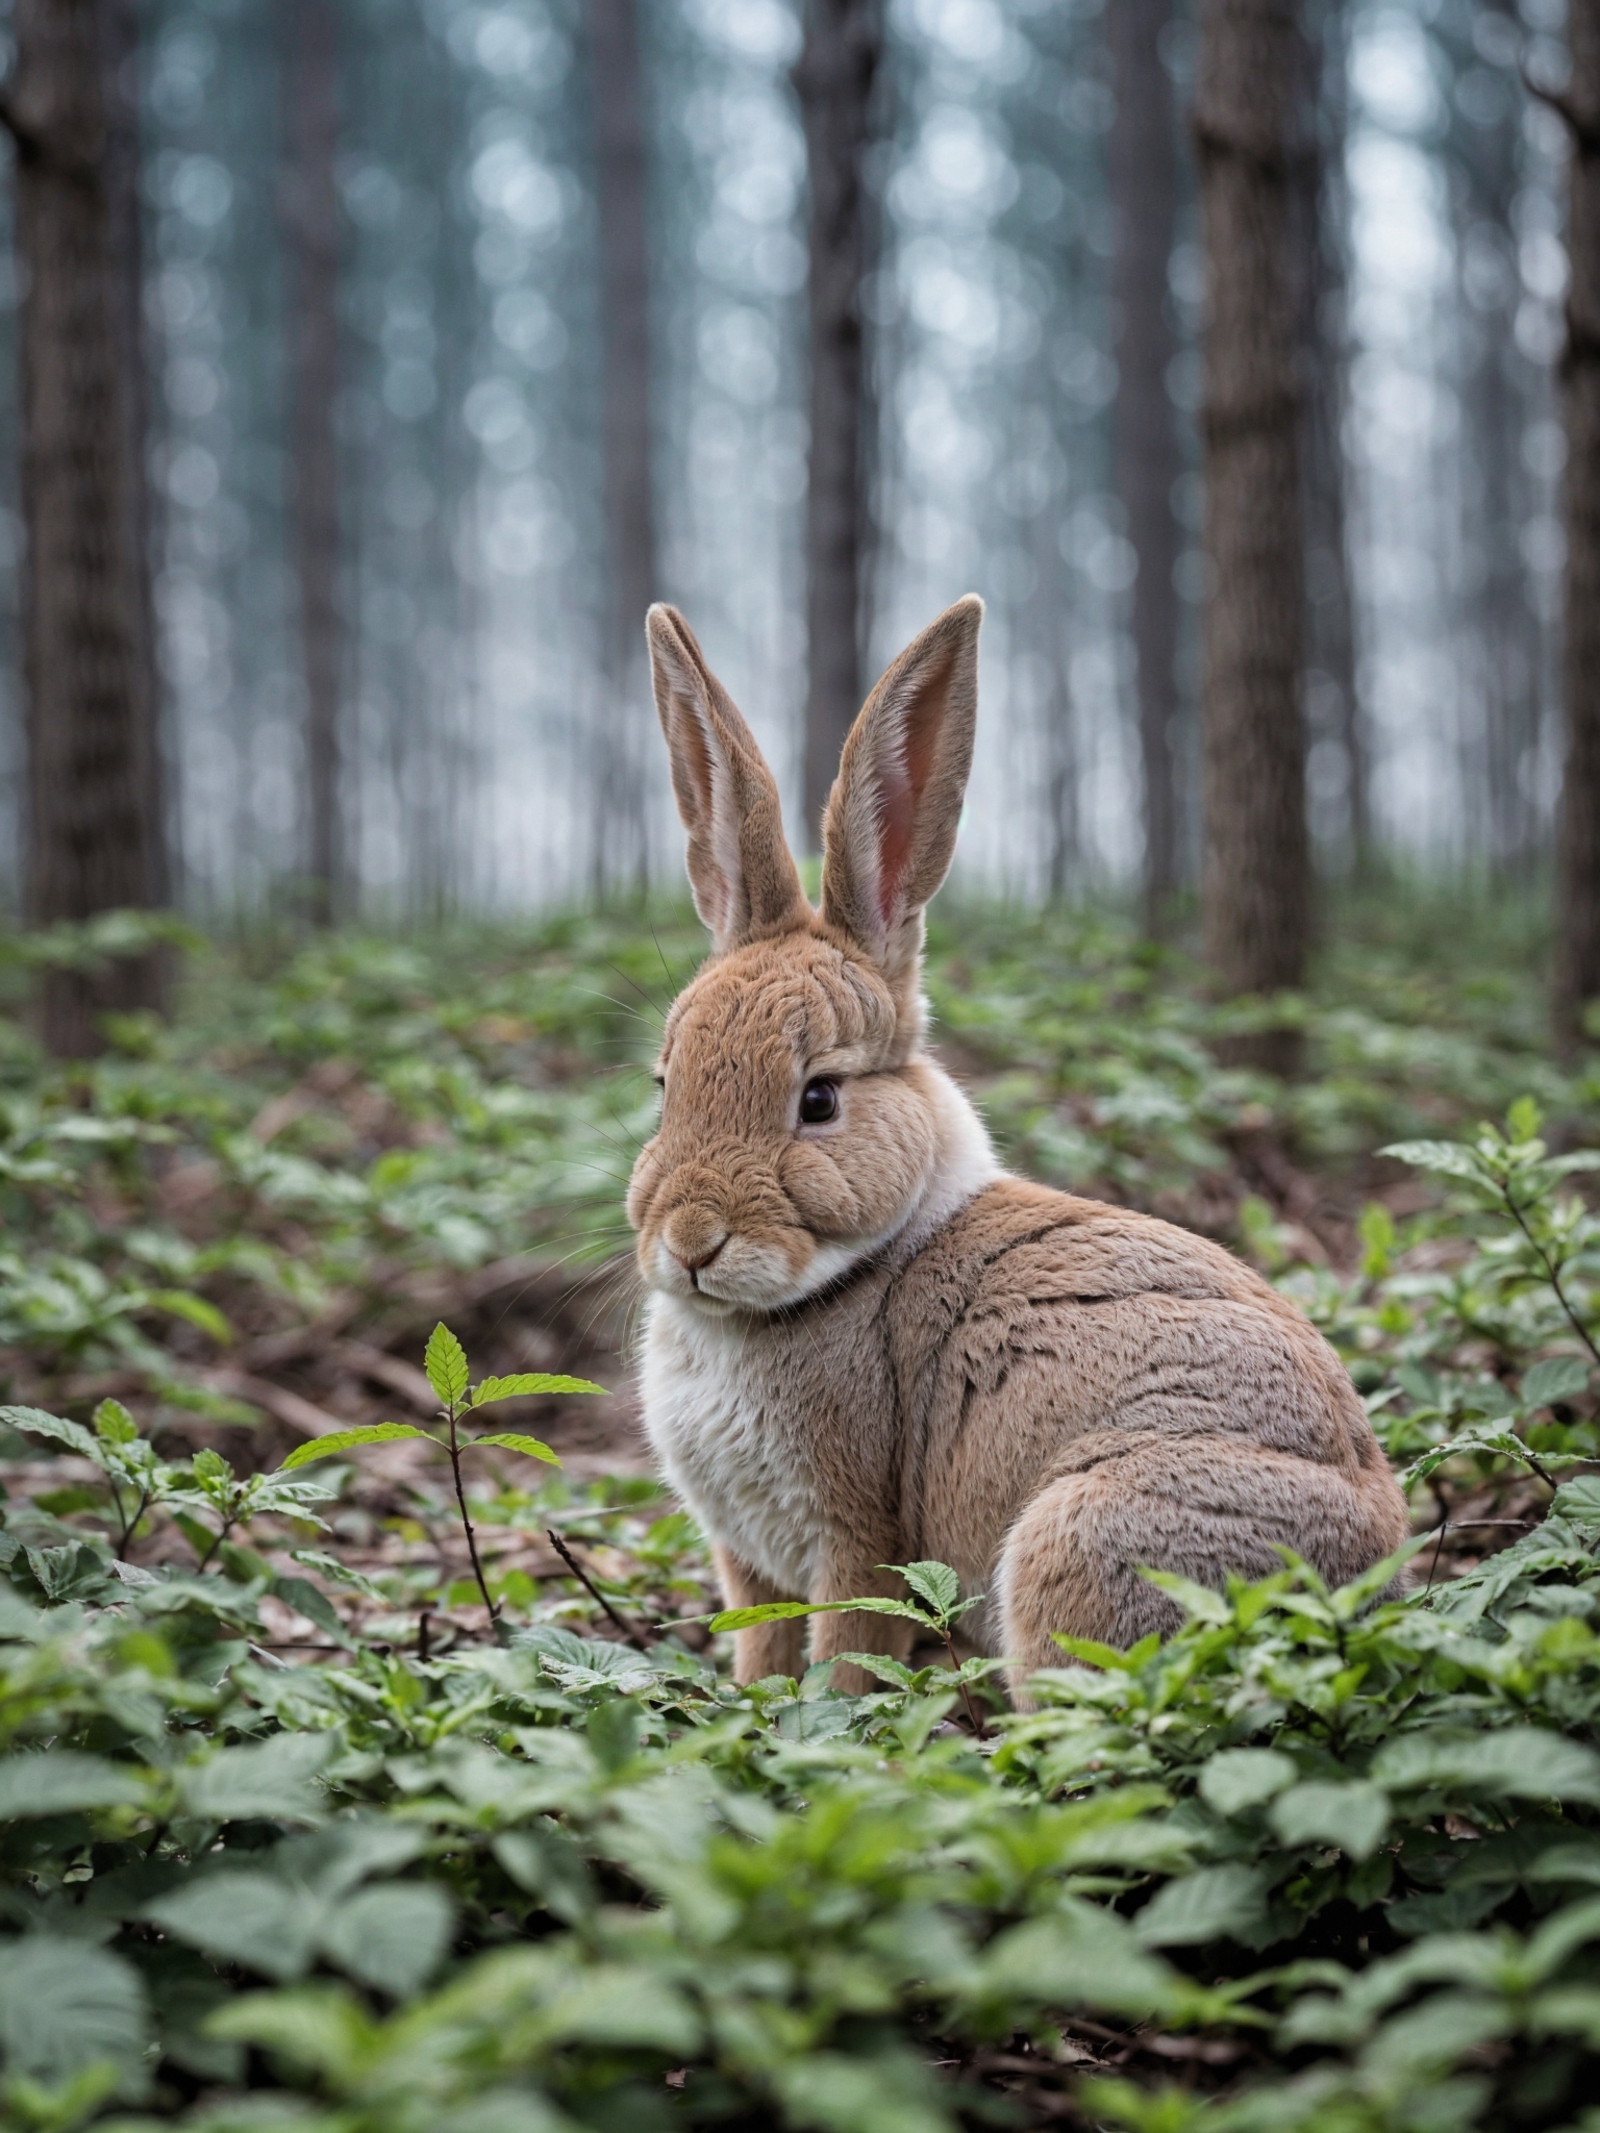 A brown and white rabbit with long ears standing in a grassy field.